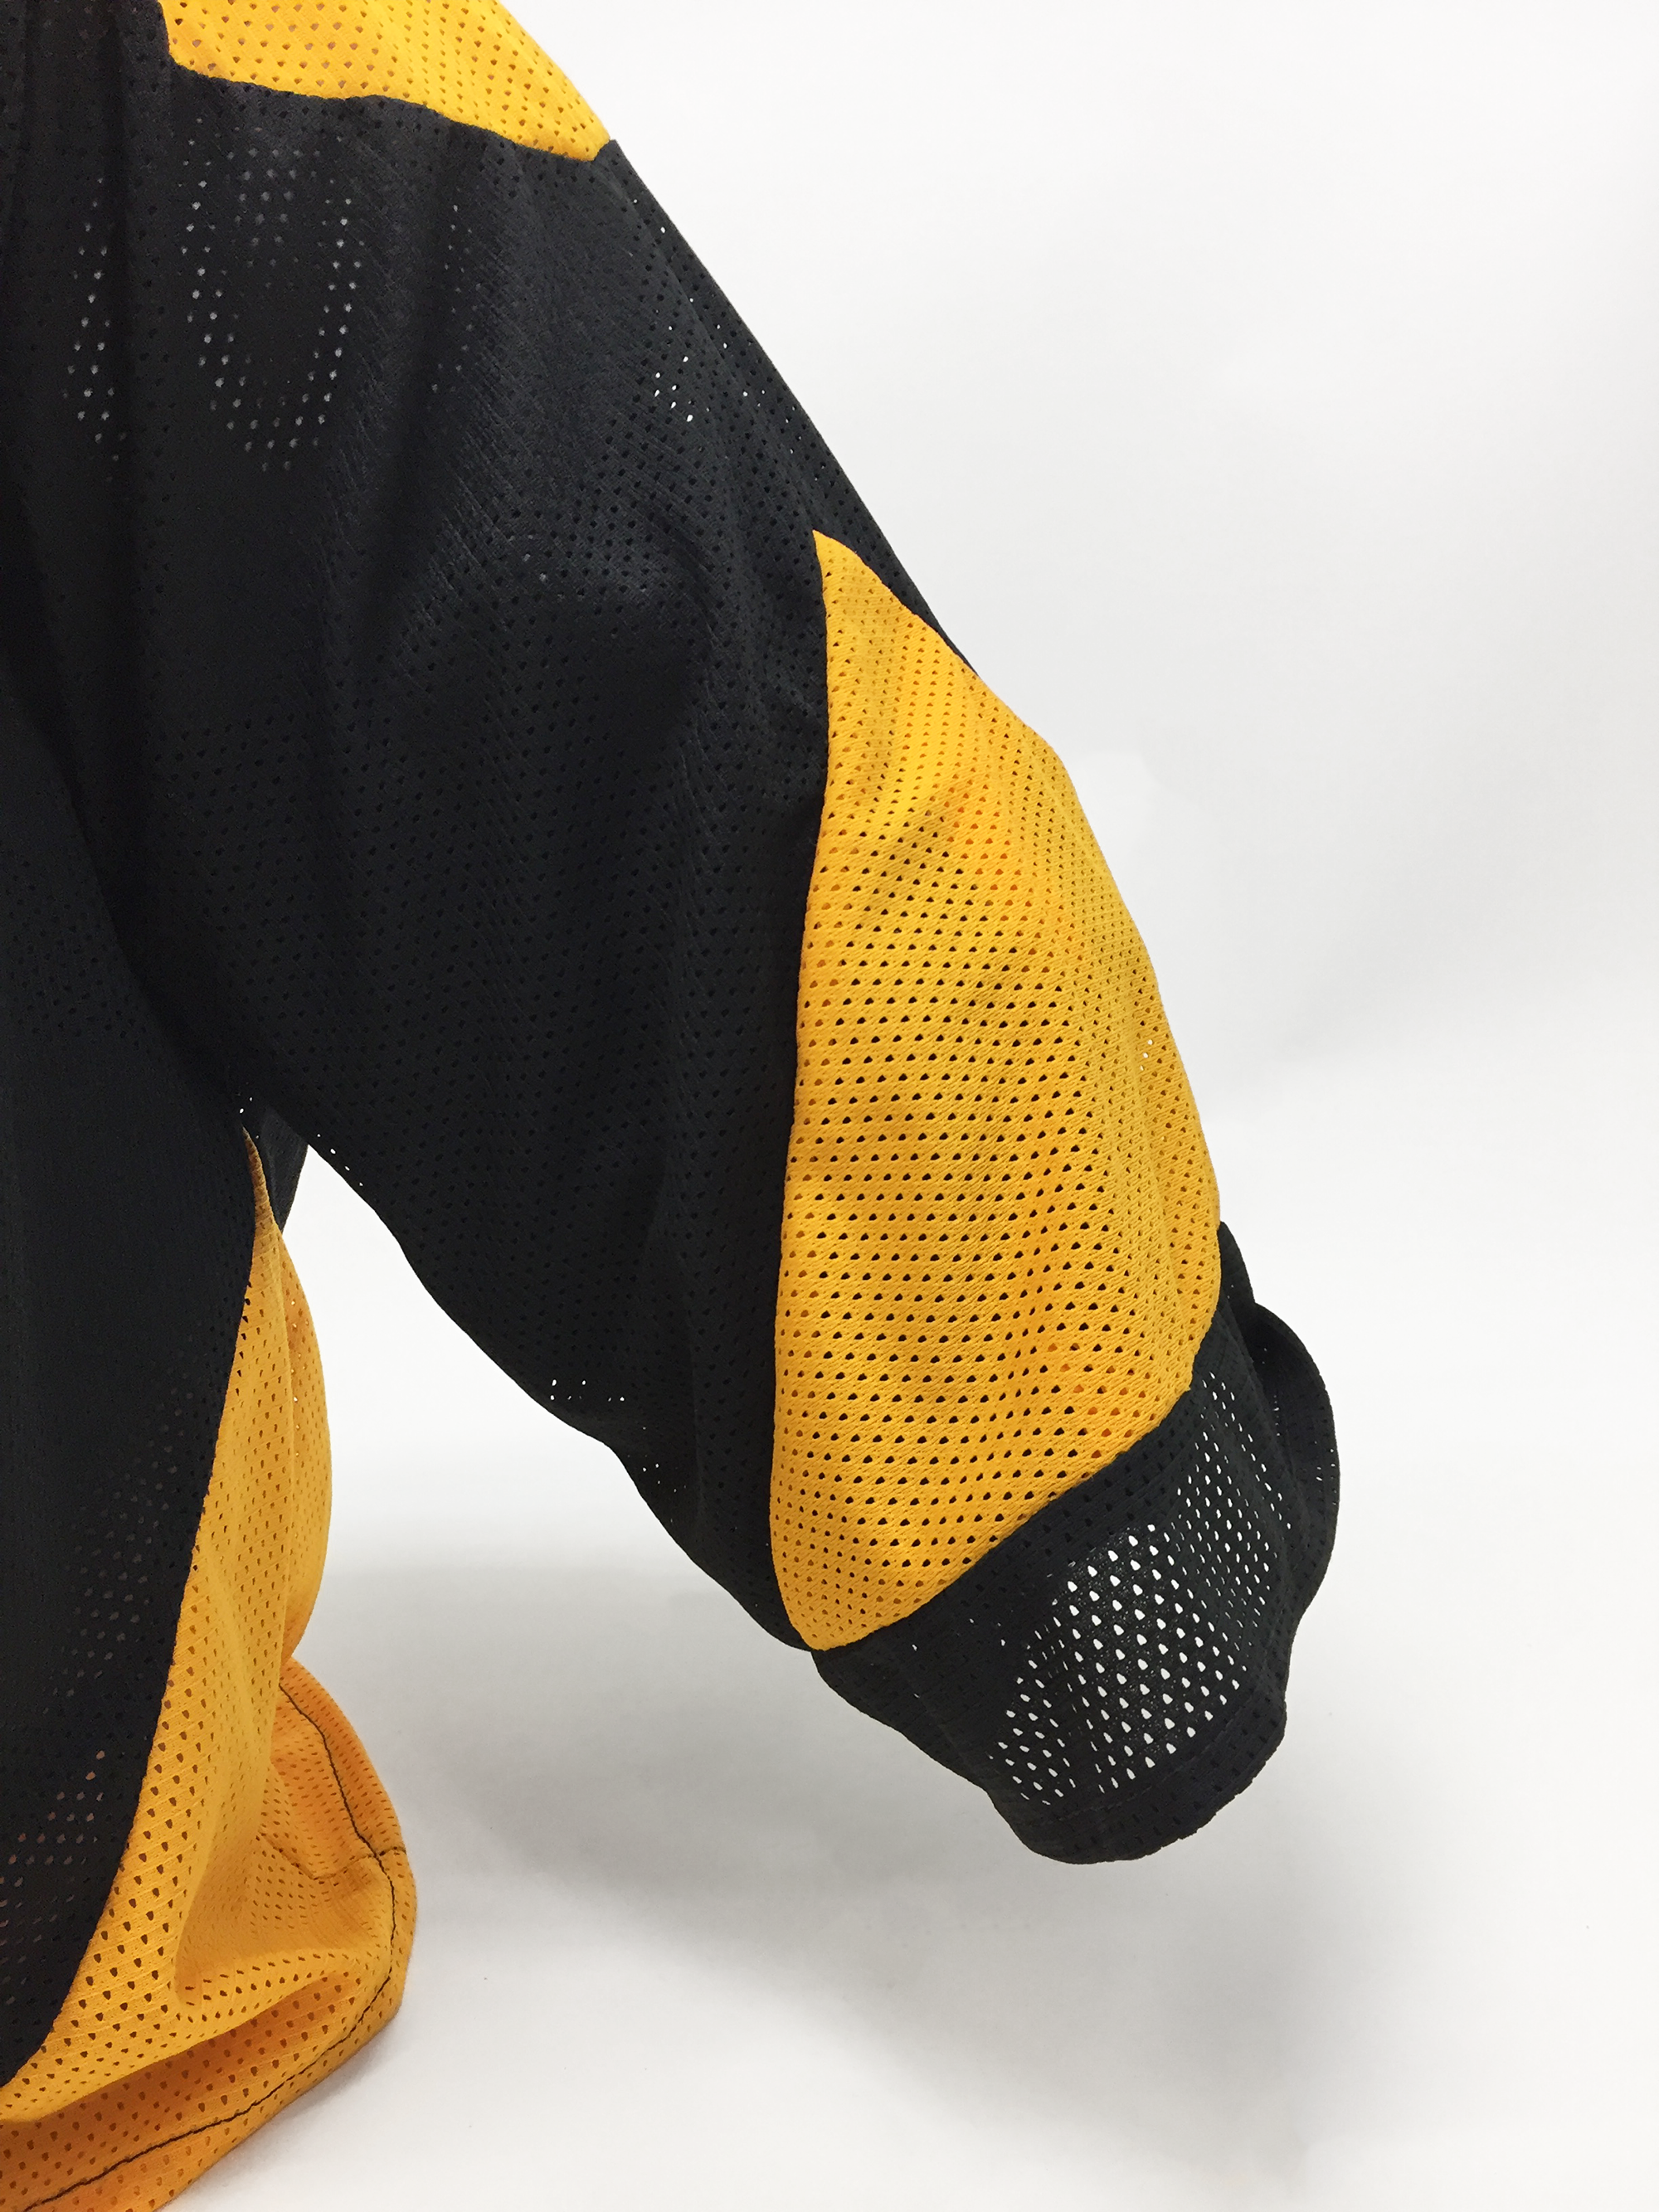 Spacious arms on the 2400 jersey in black and sport gold